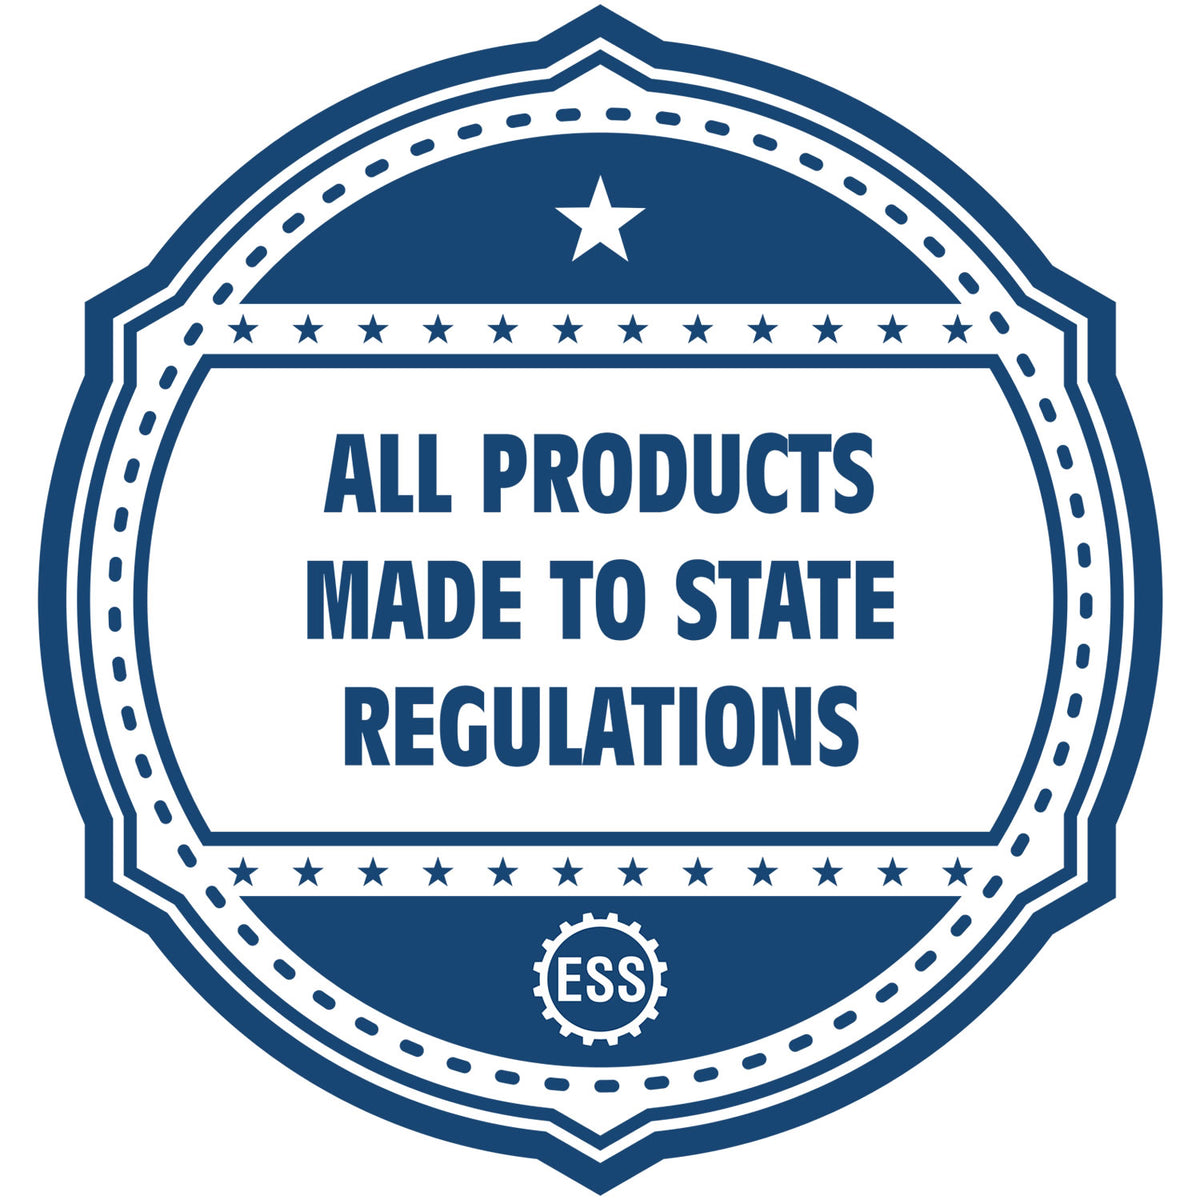 An icon or badge element for the Slim Pre-Inked Rectangular Notary Stamp for Indiana showing that this product is made in compliance with state regulations.